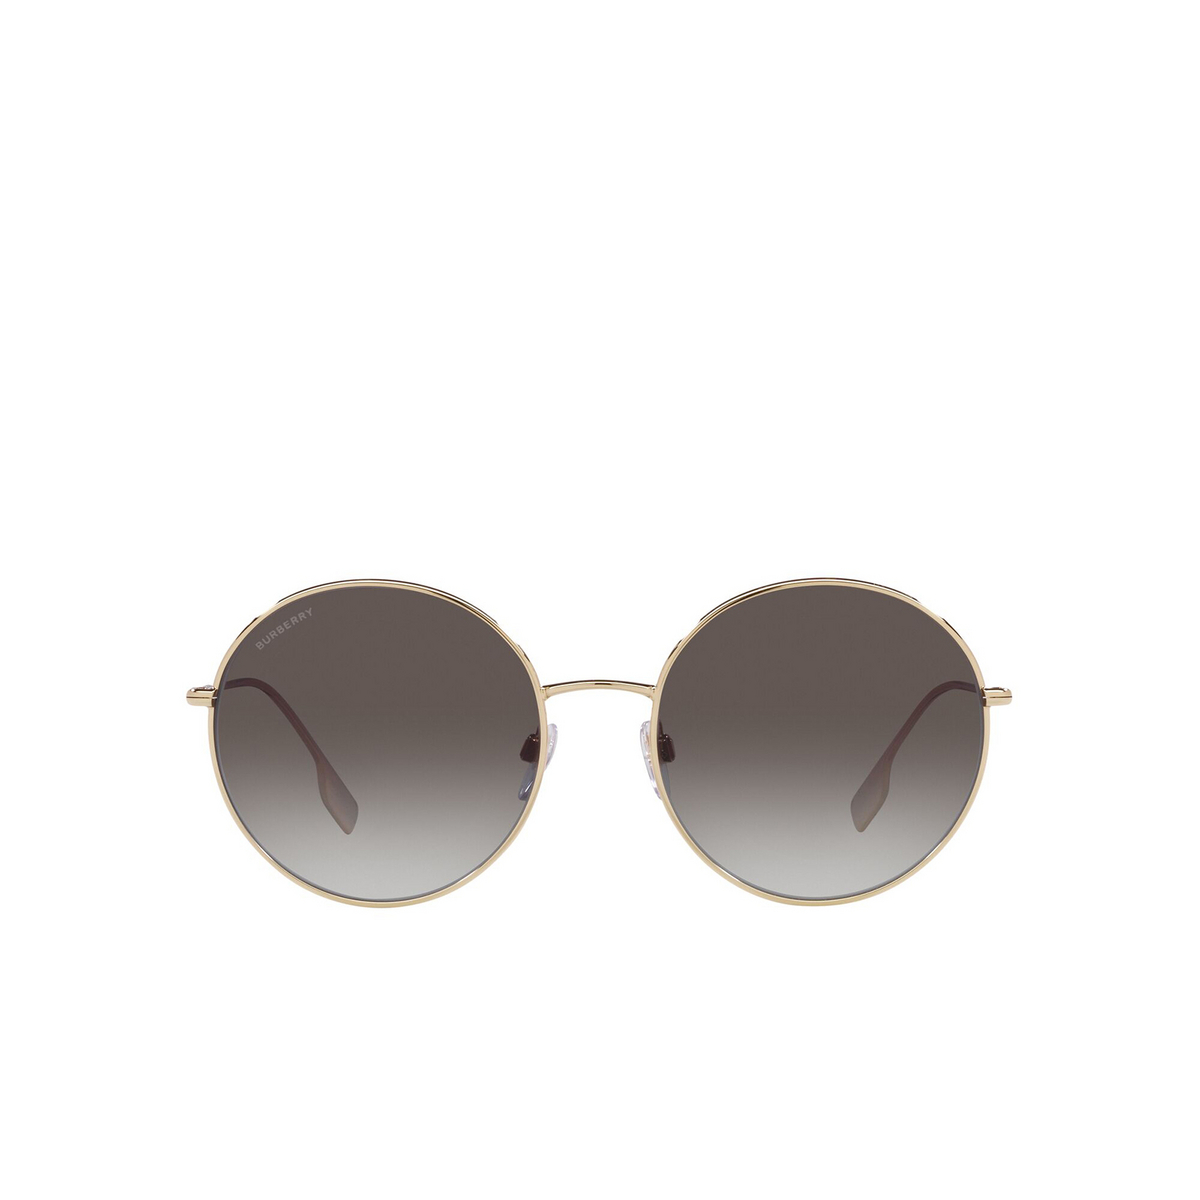 Burberry® Round Sunglasses: BE3132 Pippa color 11098G Light Gold - front view